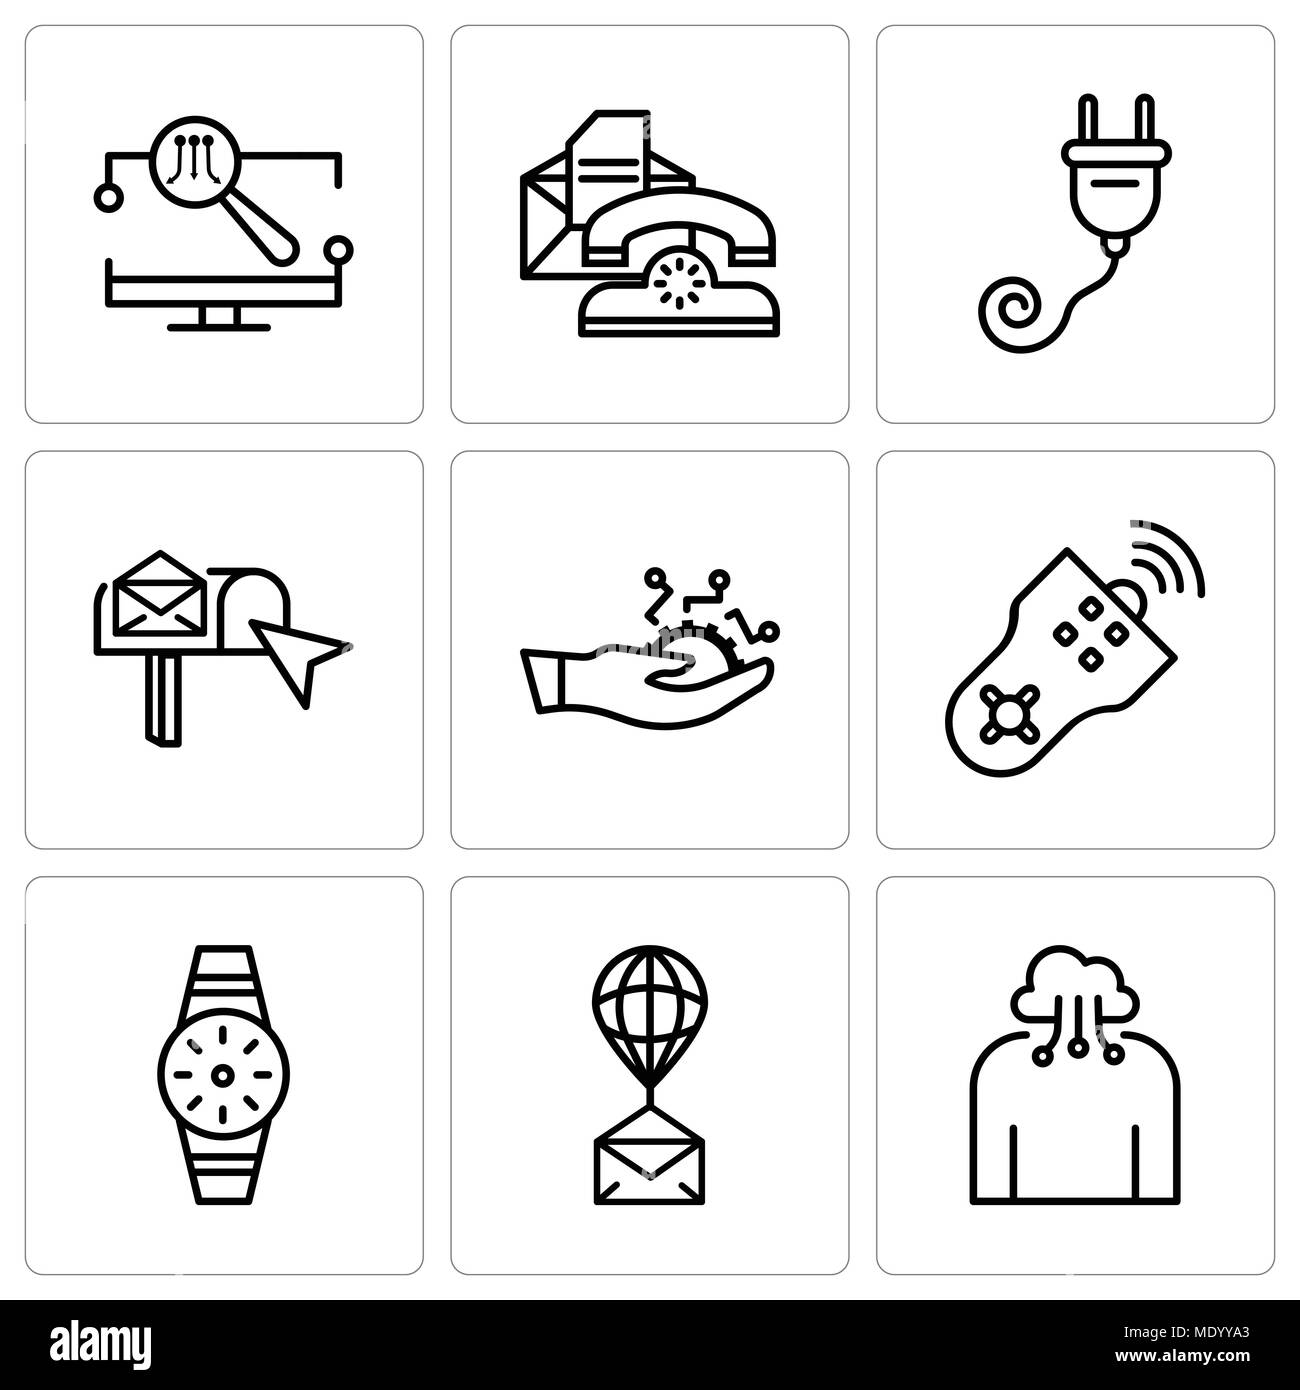 Set Of 9 simple editable icons such as Cloud computing, Air balloon, Smartwatch, Remote control, Development, email box, Plug, Telephone, Monitor, can Stock Vector